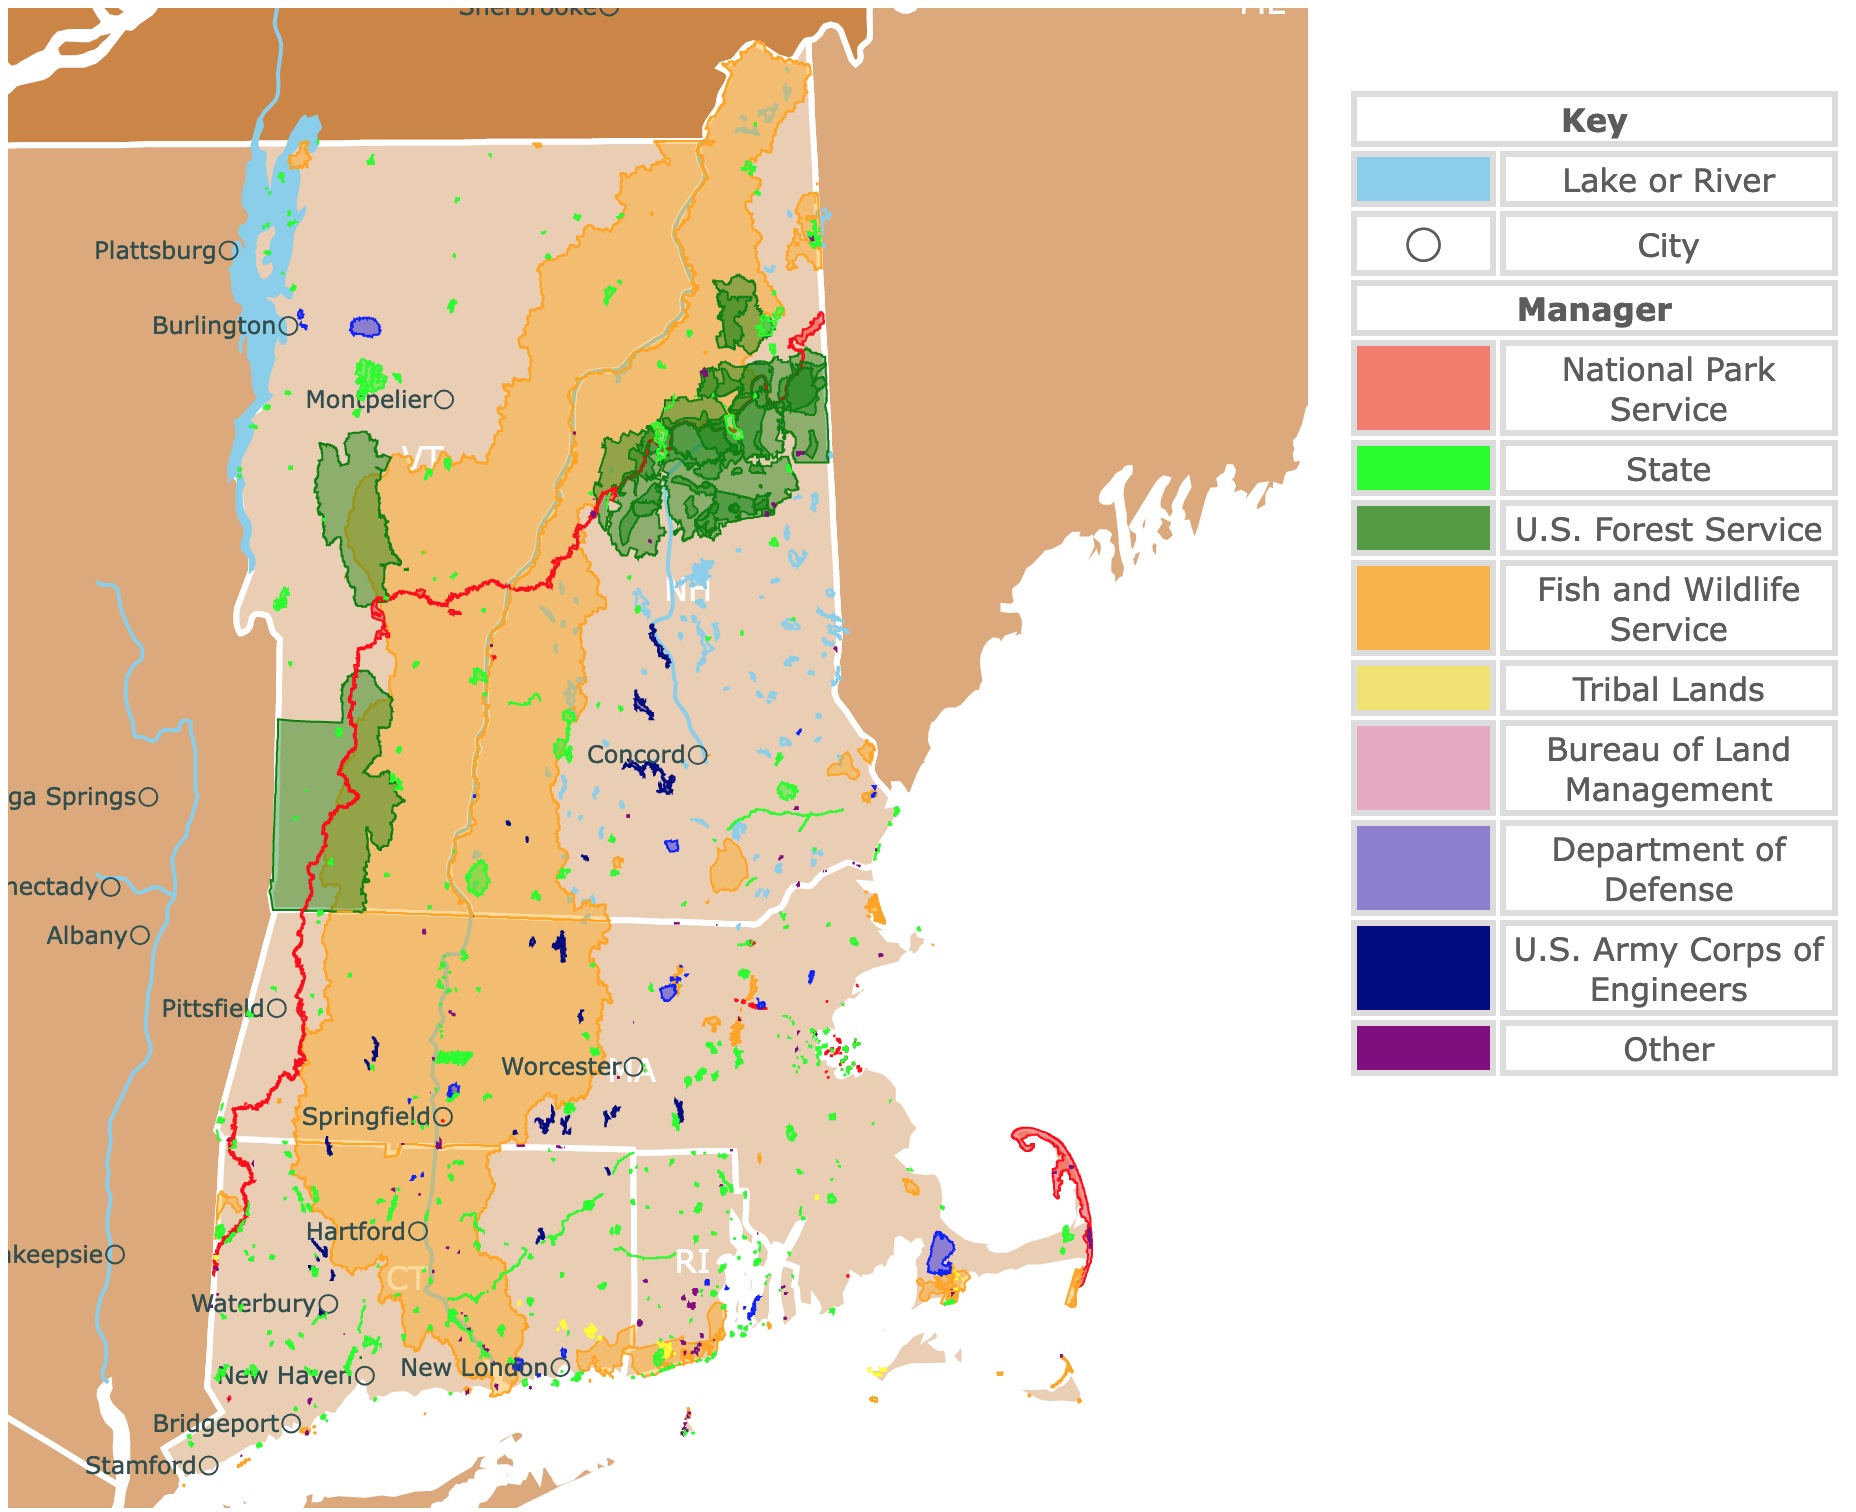 Map of New England state parks, national parks, forests, and public lands areas